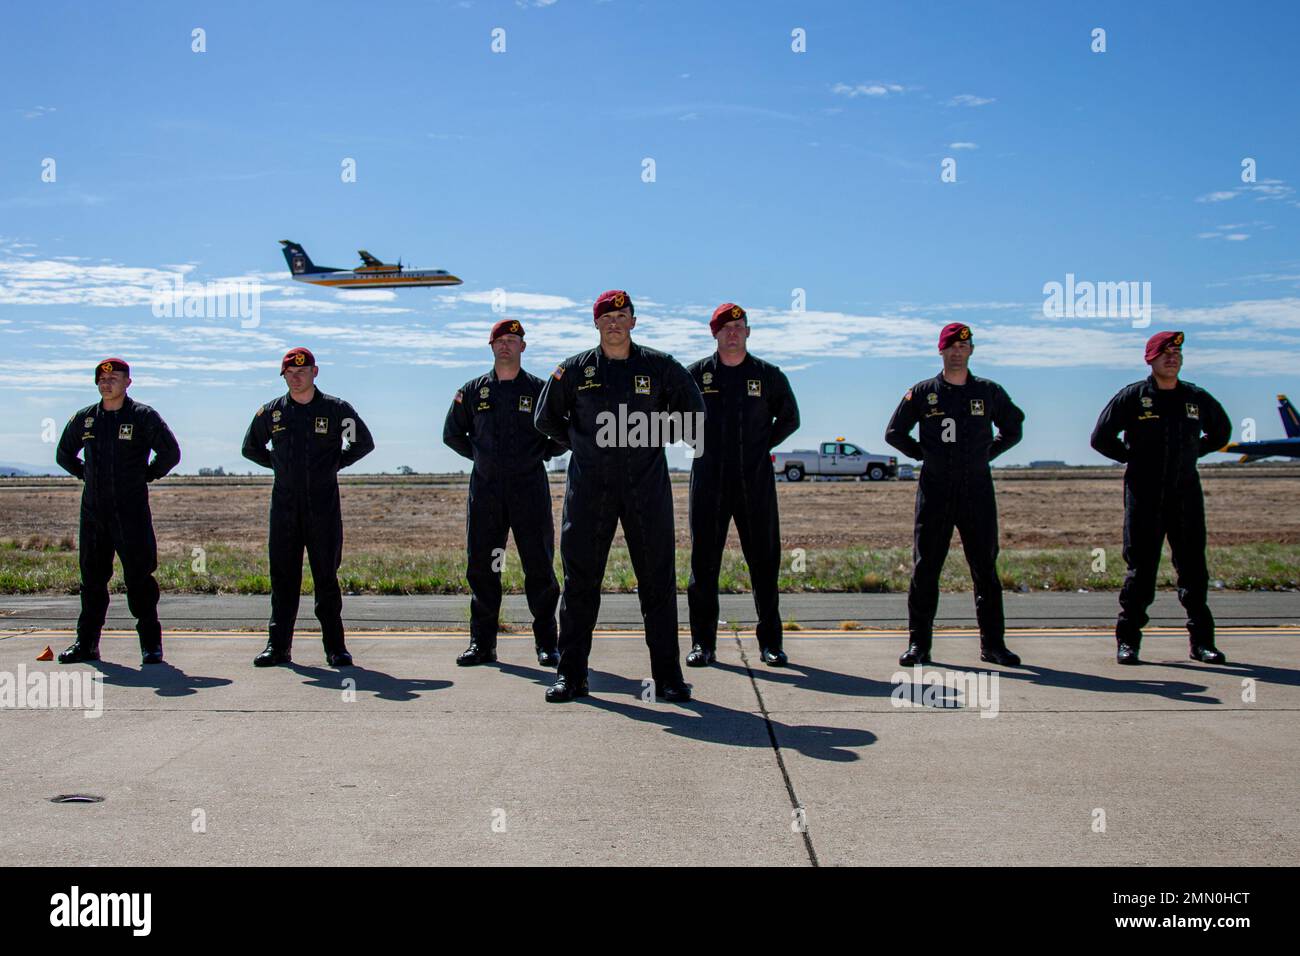 The U.S. Army Parachute Team, nicknamed the Golden Knights, stand at parade rest at the 2022 Marine Corps Air Station Miramar Air Show at MCAS Miramar, California, Sept. 24, 2022. Nicknamed the Golden Knights in 1962, “Golden” signifies the gold medals the team won in international competitions, and “Knights” alludes to the team’s ambition to conquer the skies. The Golden Knights perform in more than 100 events per year.  The theme for the 2022 MCAS Miramar Air Show, “Marines Fight, Evolve and Win,” reflects the Marine Corps’ ongoing modernization efforts to prepare for future conflicts. Stock Photo